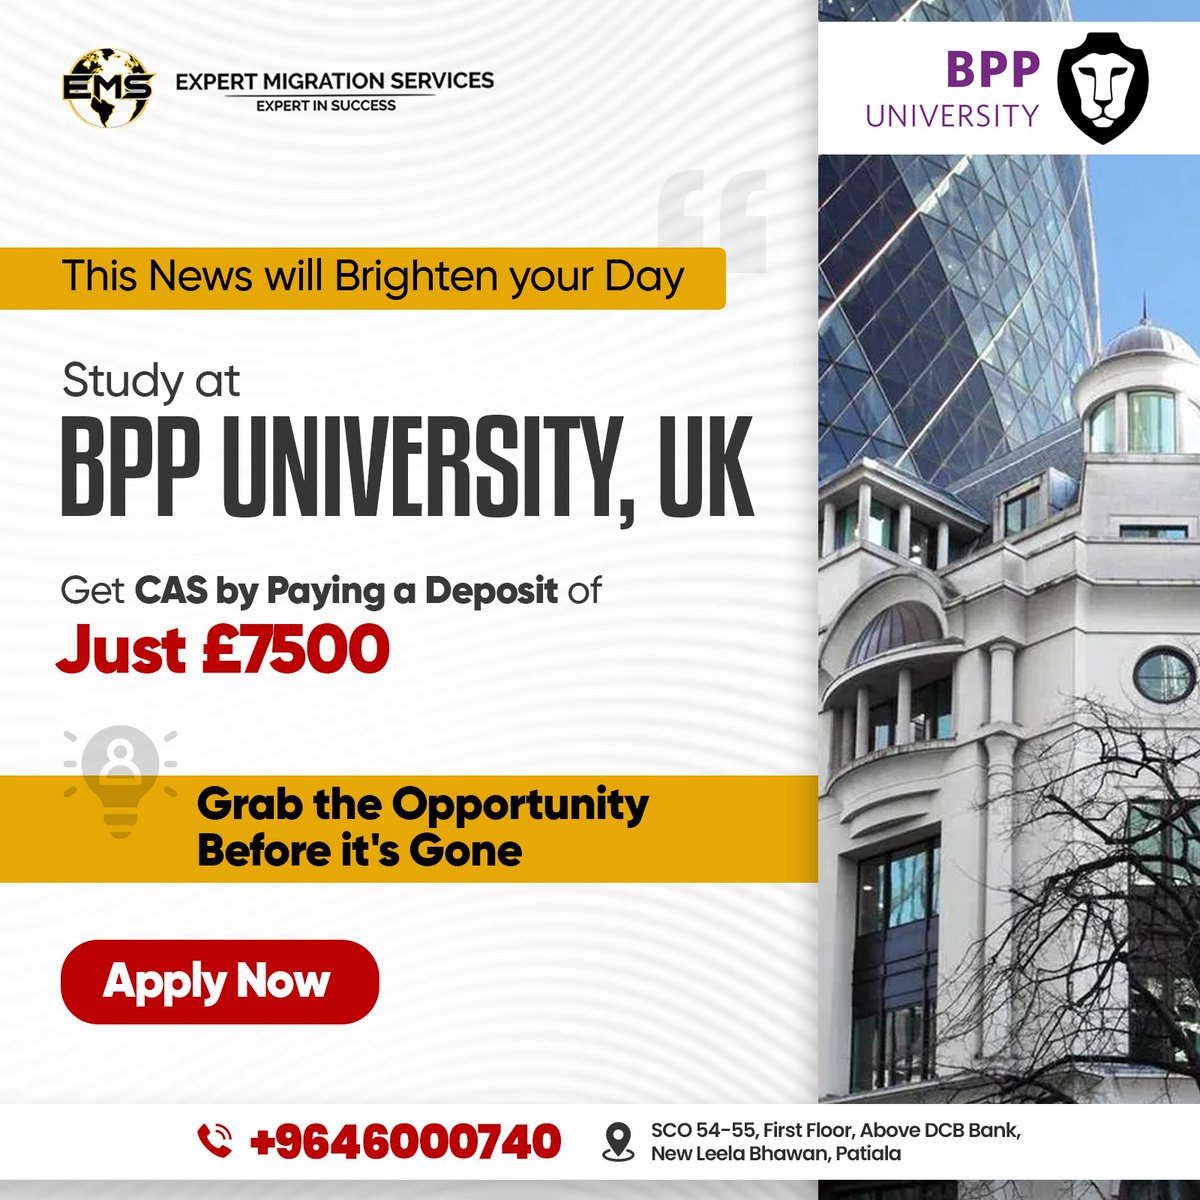 🇬🇧  Study at BPP University, UK! 📚
Start your journey with a £7,500 deposit. Explore programs & secure your CAS.🏫 
Contact us now!⤵

#ExpertMigrationServices #UKImmigration #StudyInUK #StudyVisa #TopUKUniversity
#BPPUniversity #UKEducation